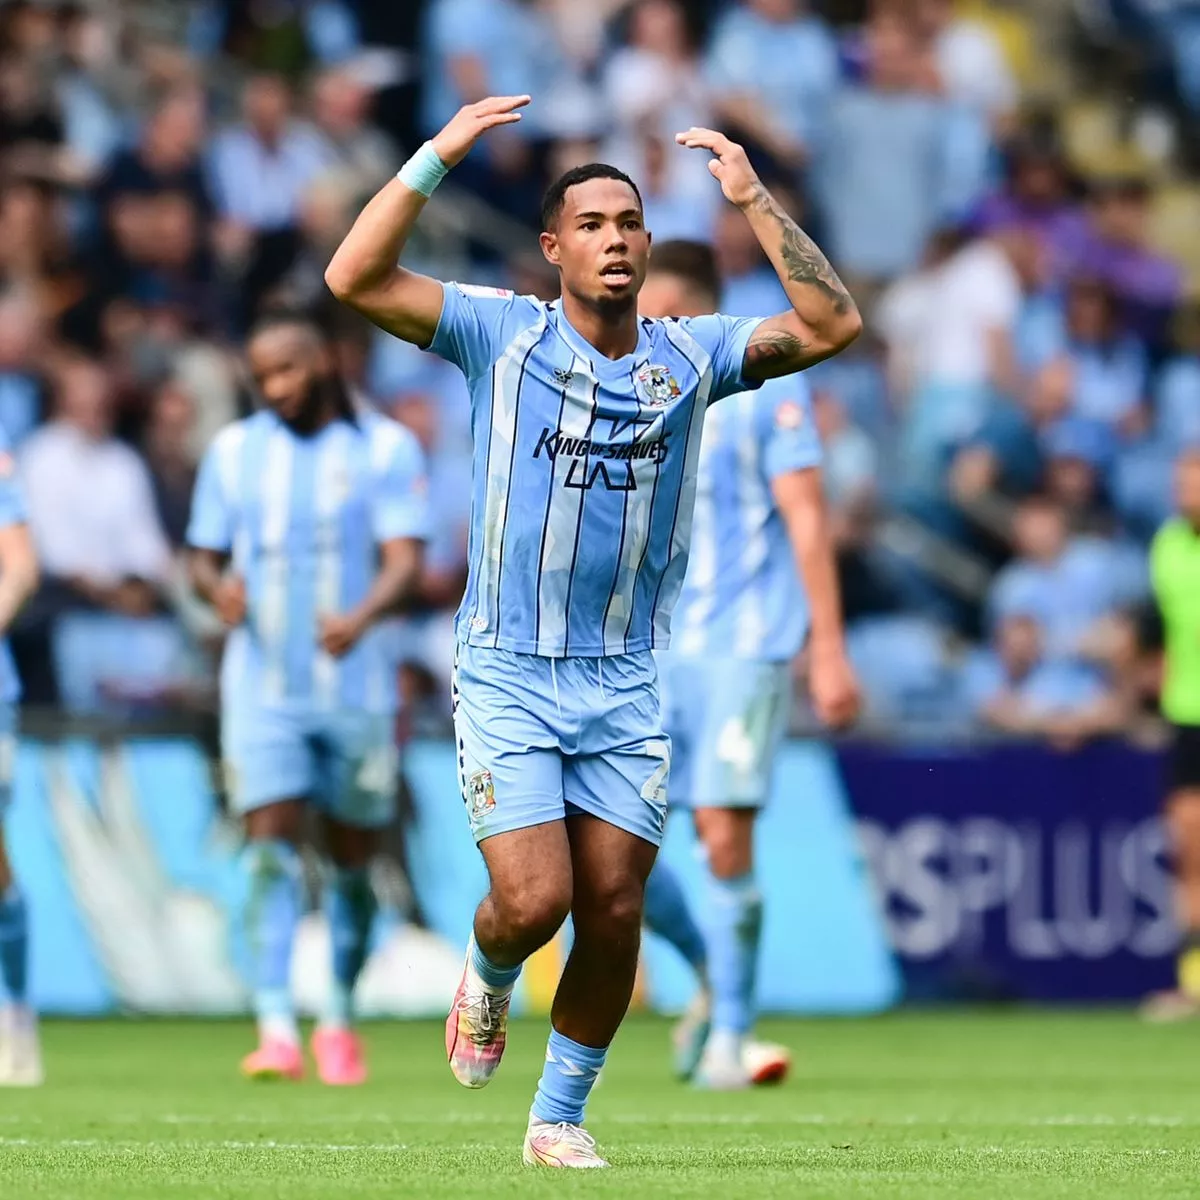 "There is hope" -- Coventry City star trolls Manchester United